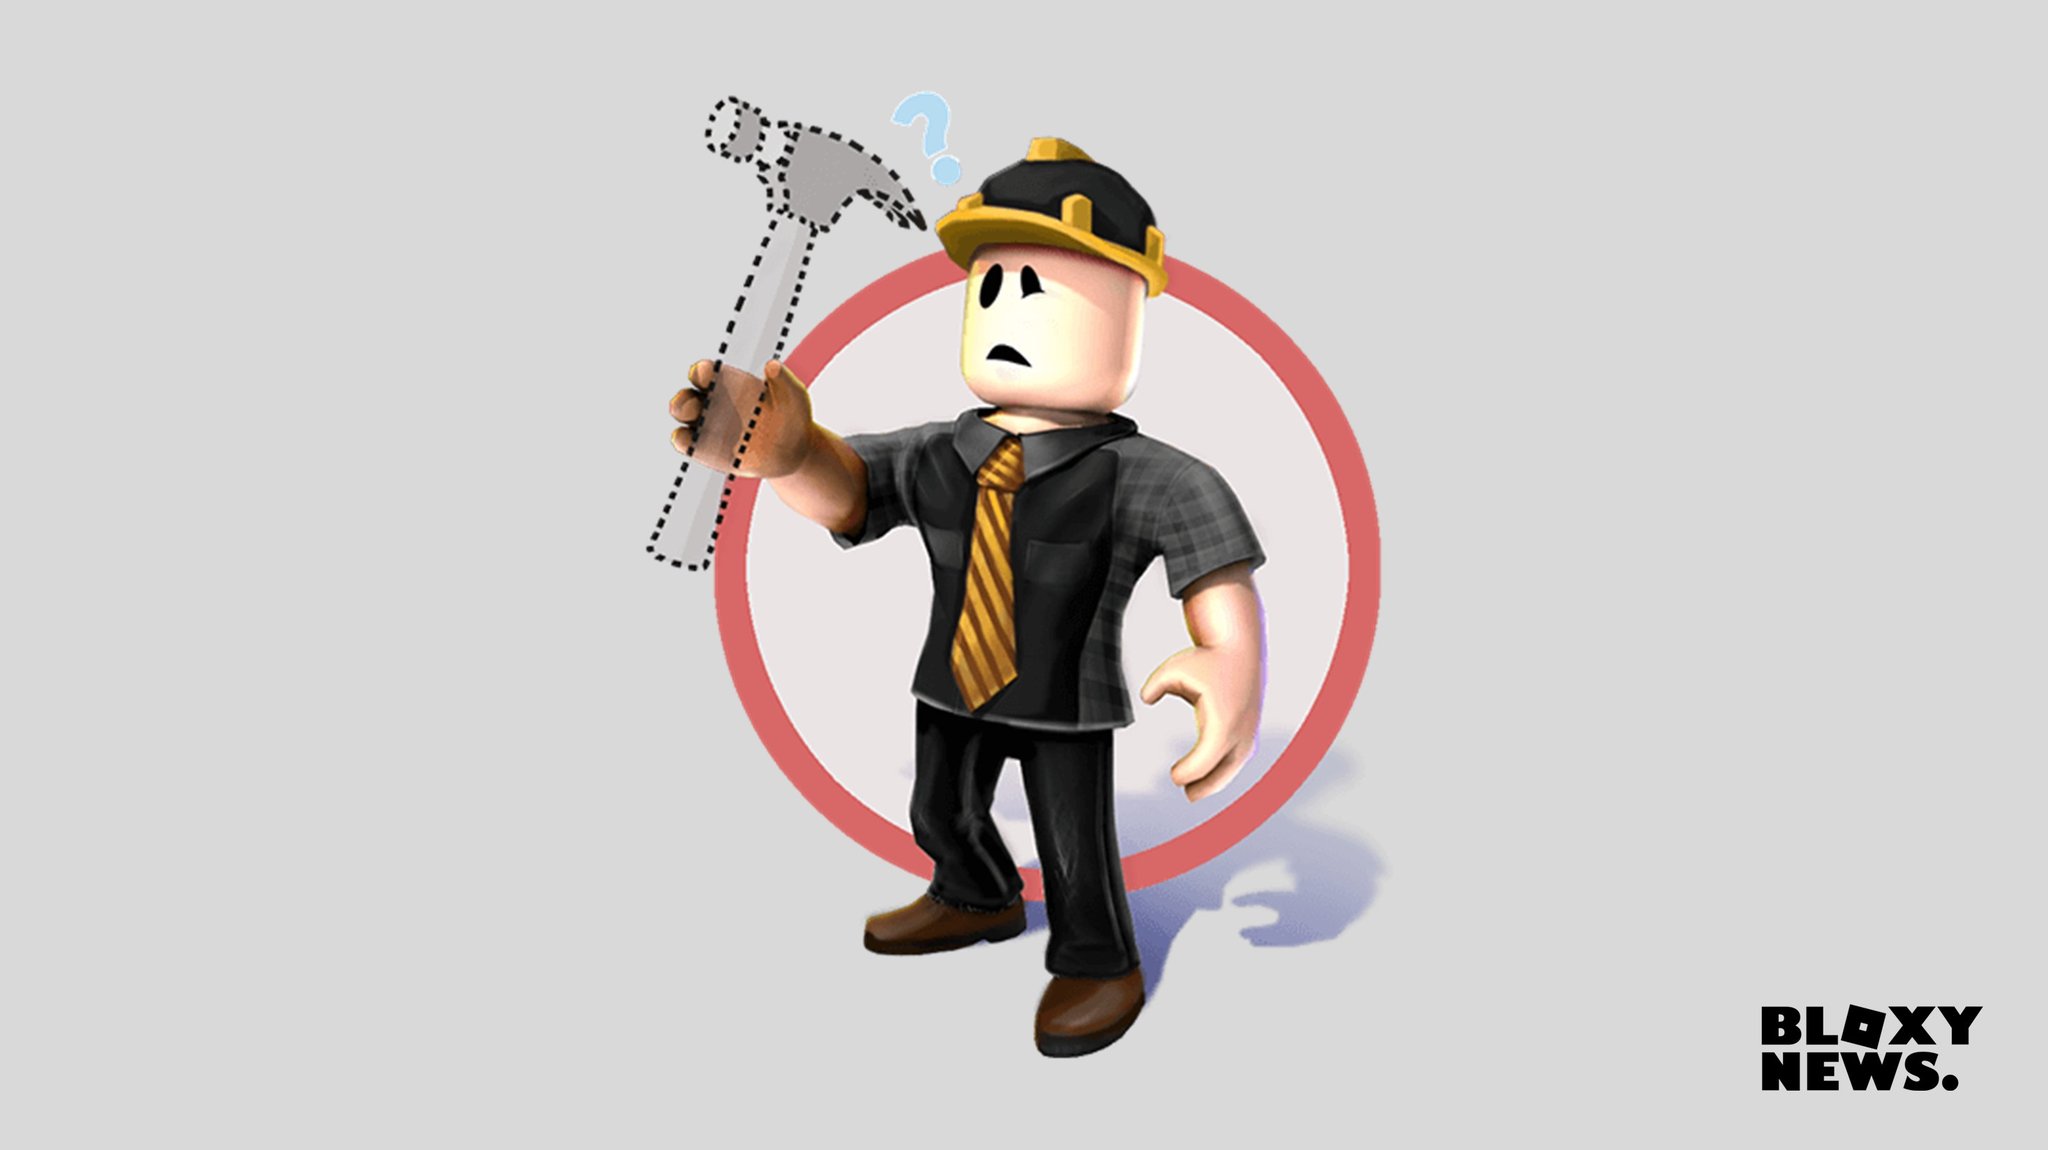 Bloxy News On Twitter Status Roblox Is Currently Experiencing Data Store Issues This Is Causing Games To Go Temporarily On Private So You Don T Lose Any Data I Will Keep You Updated Https T Co Gwant77dxm Https T Co Qwebiojub7 - roblox datastore tools